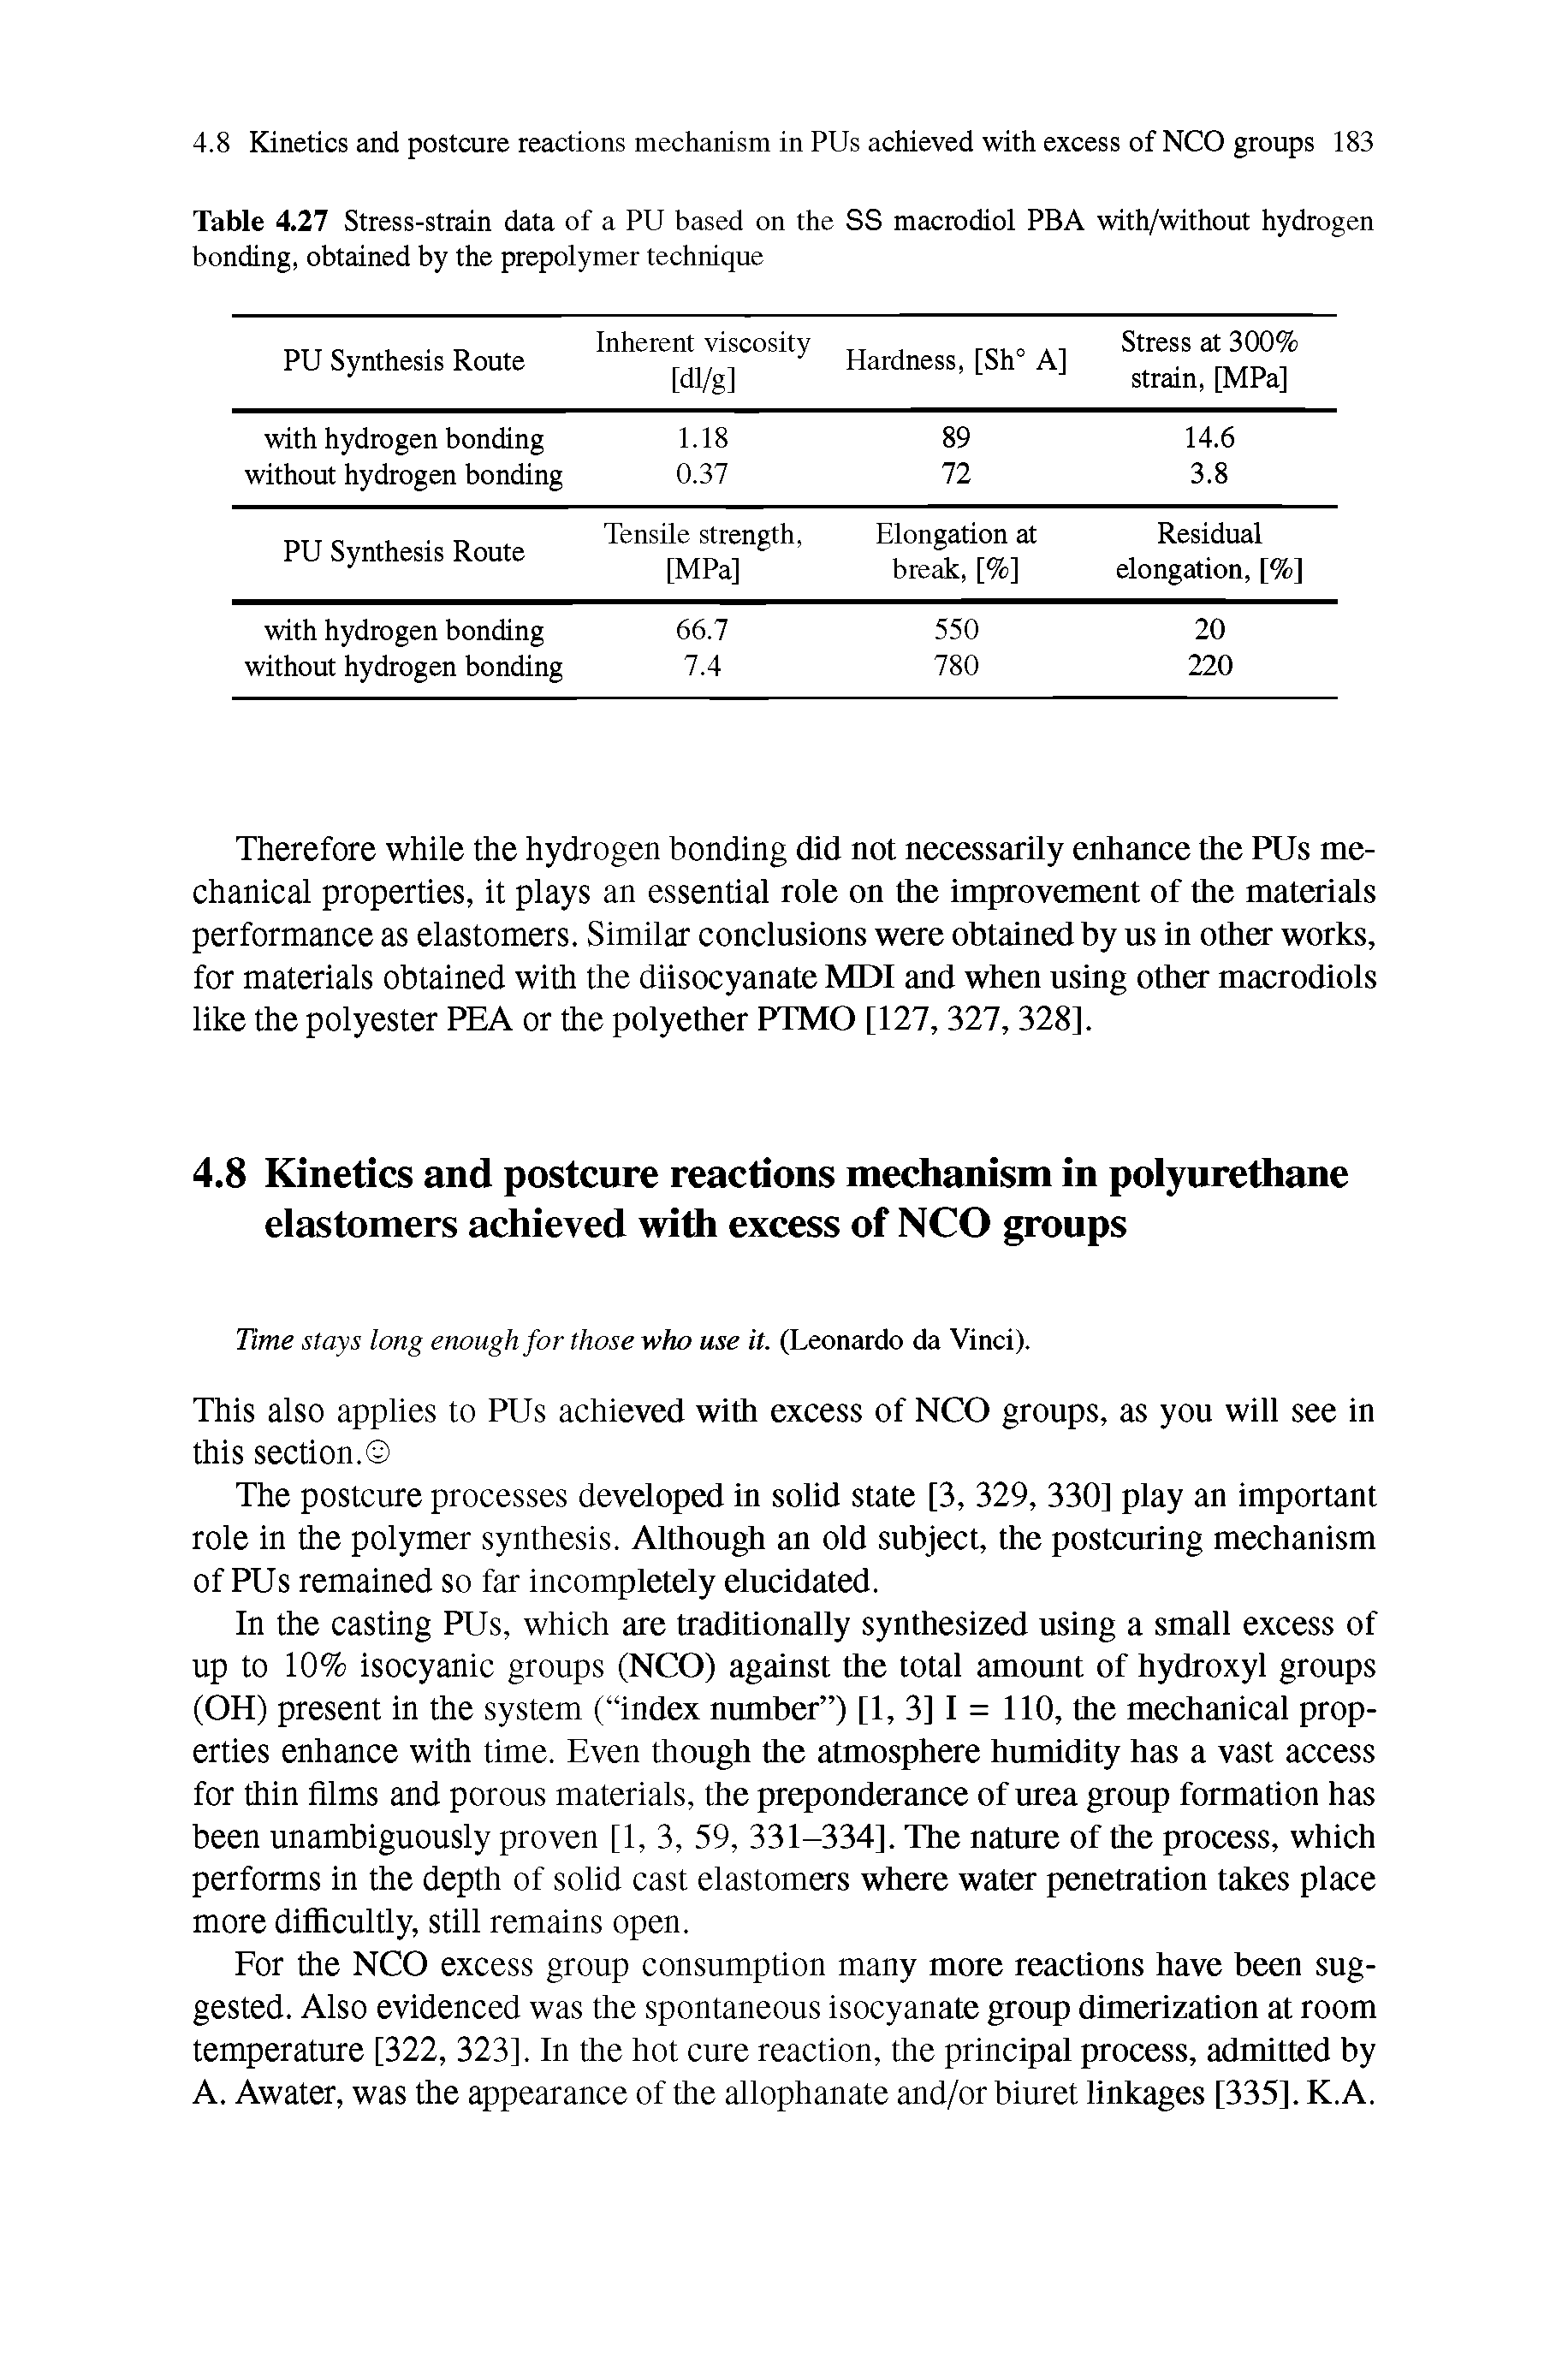 Table 4.27 Stress-strain data of a PU based on the SS macrodiol PBA with/without hydrogen bonding, obtained by the prepolymer technique...